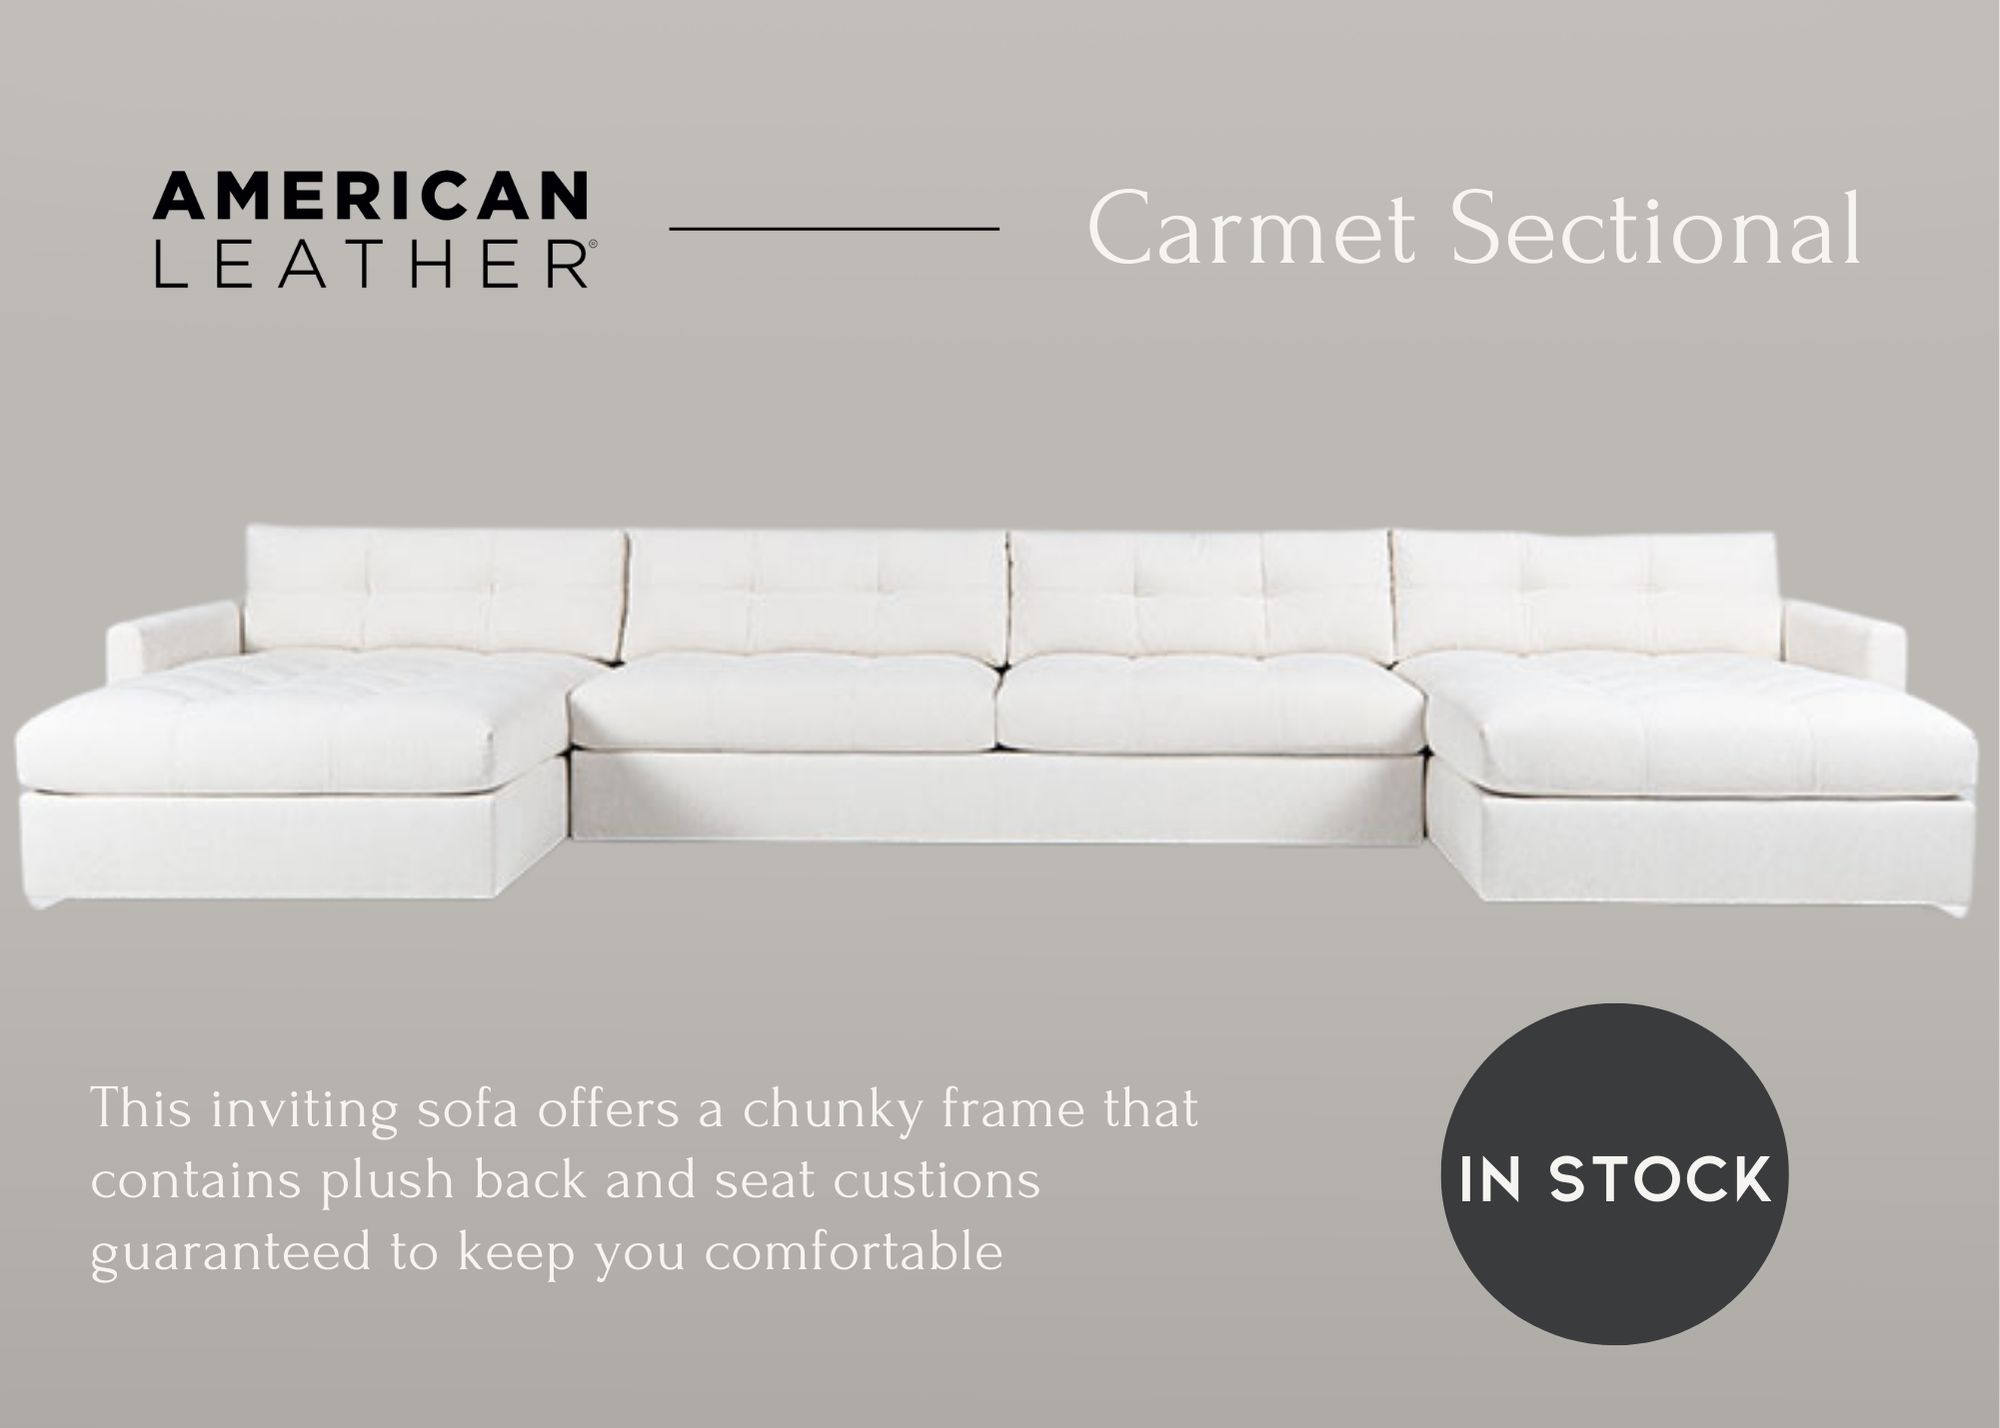 Keep your Clients Cozy with the Carmet Sectional from Bassman Blaine Inc. - News from Laguna Design Center